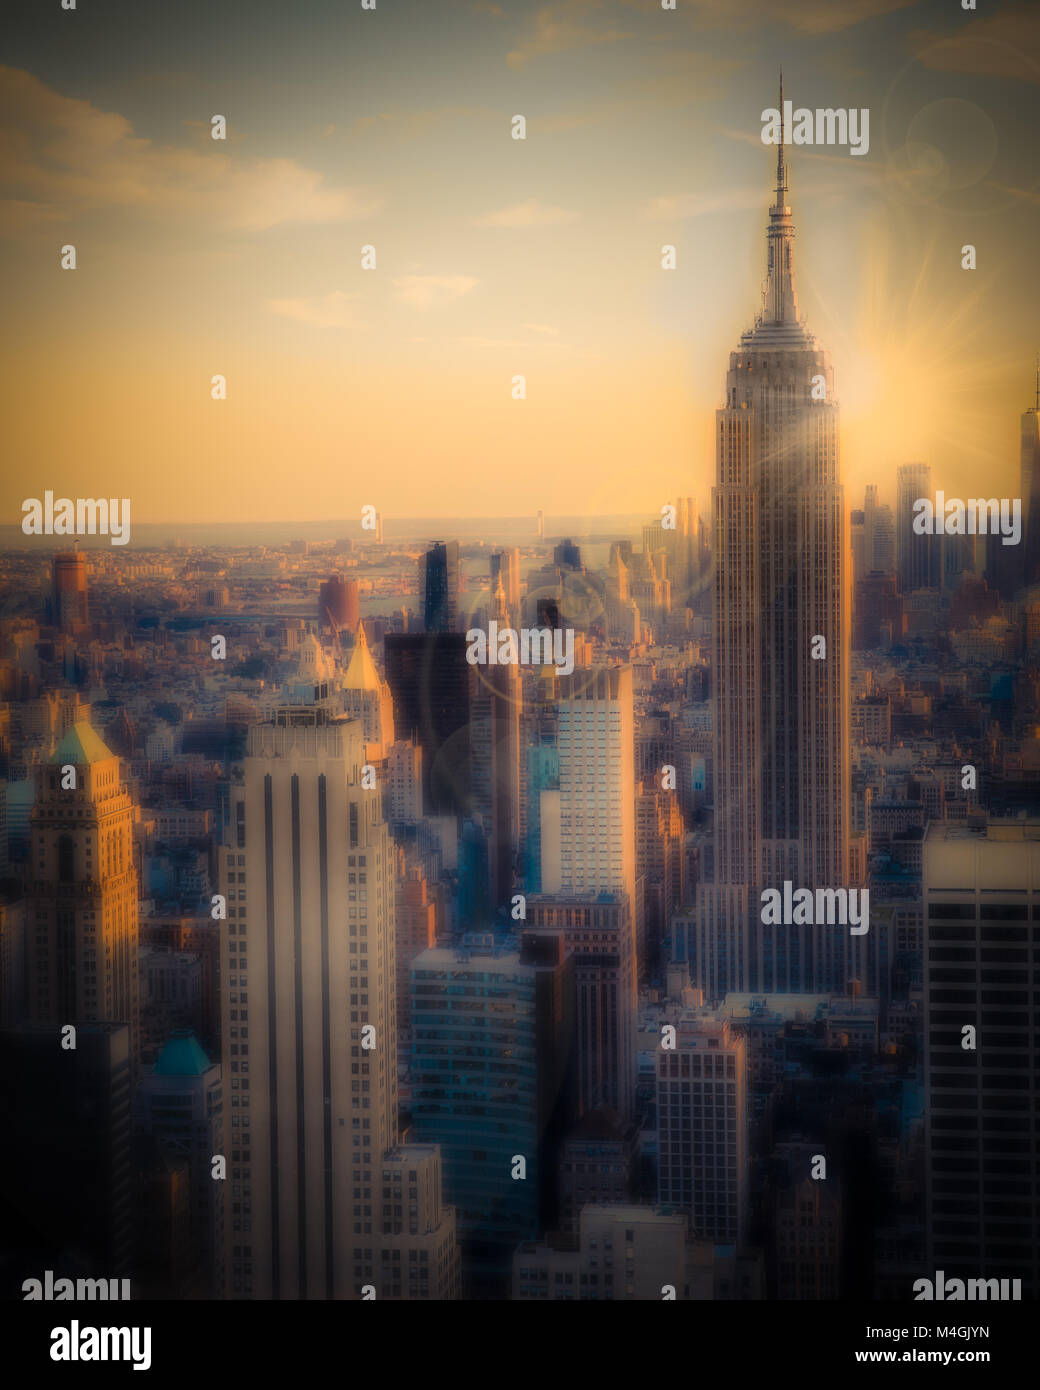 New York City Skyline at sunset with artistic blur effect Stock Photo